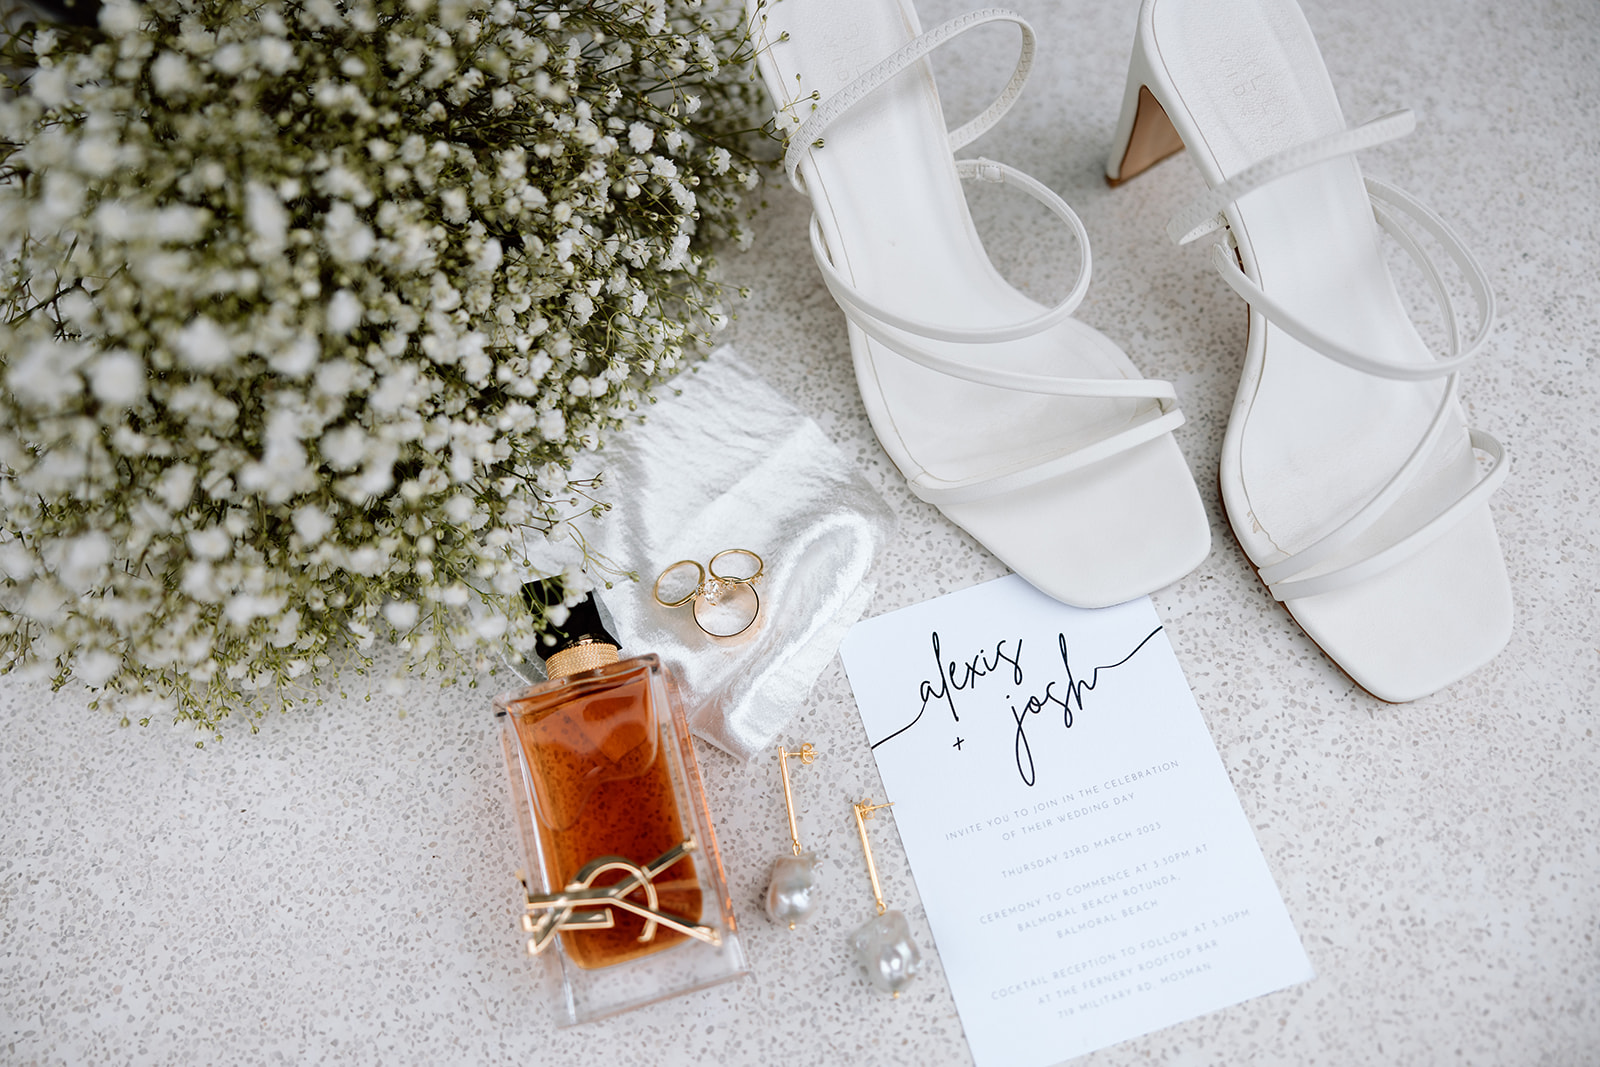 Bridal details at the wedding in The Fernery Mosman